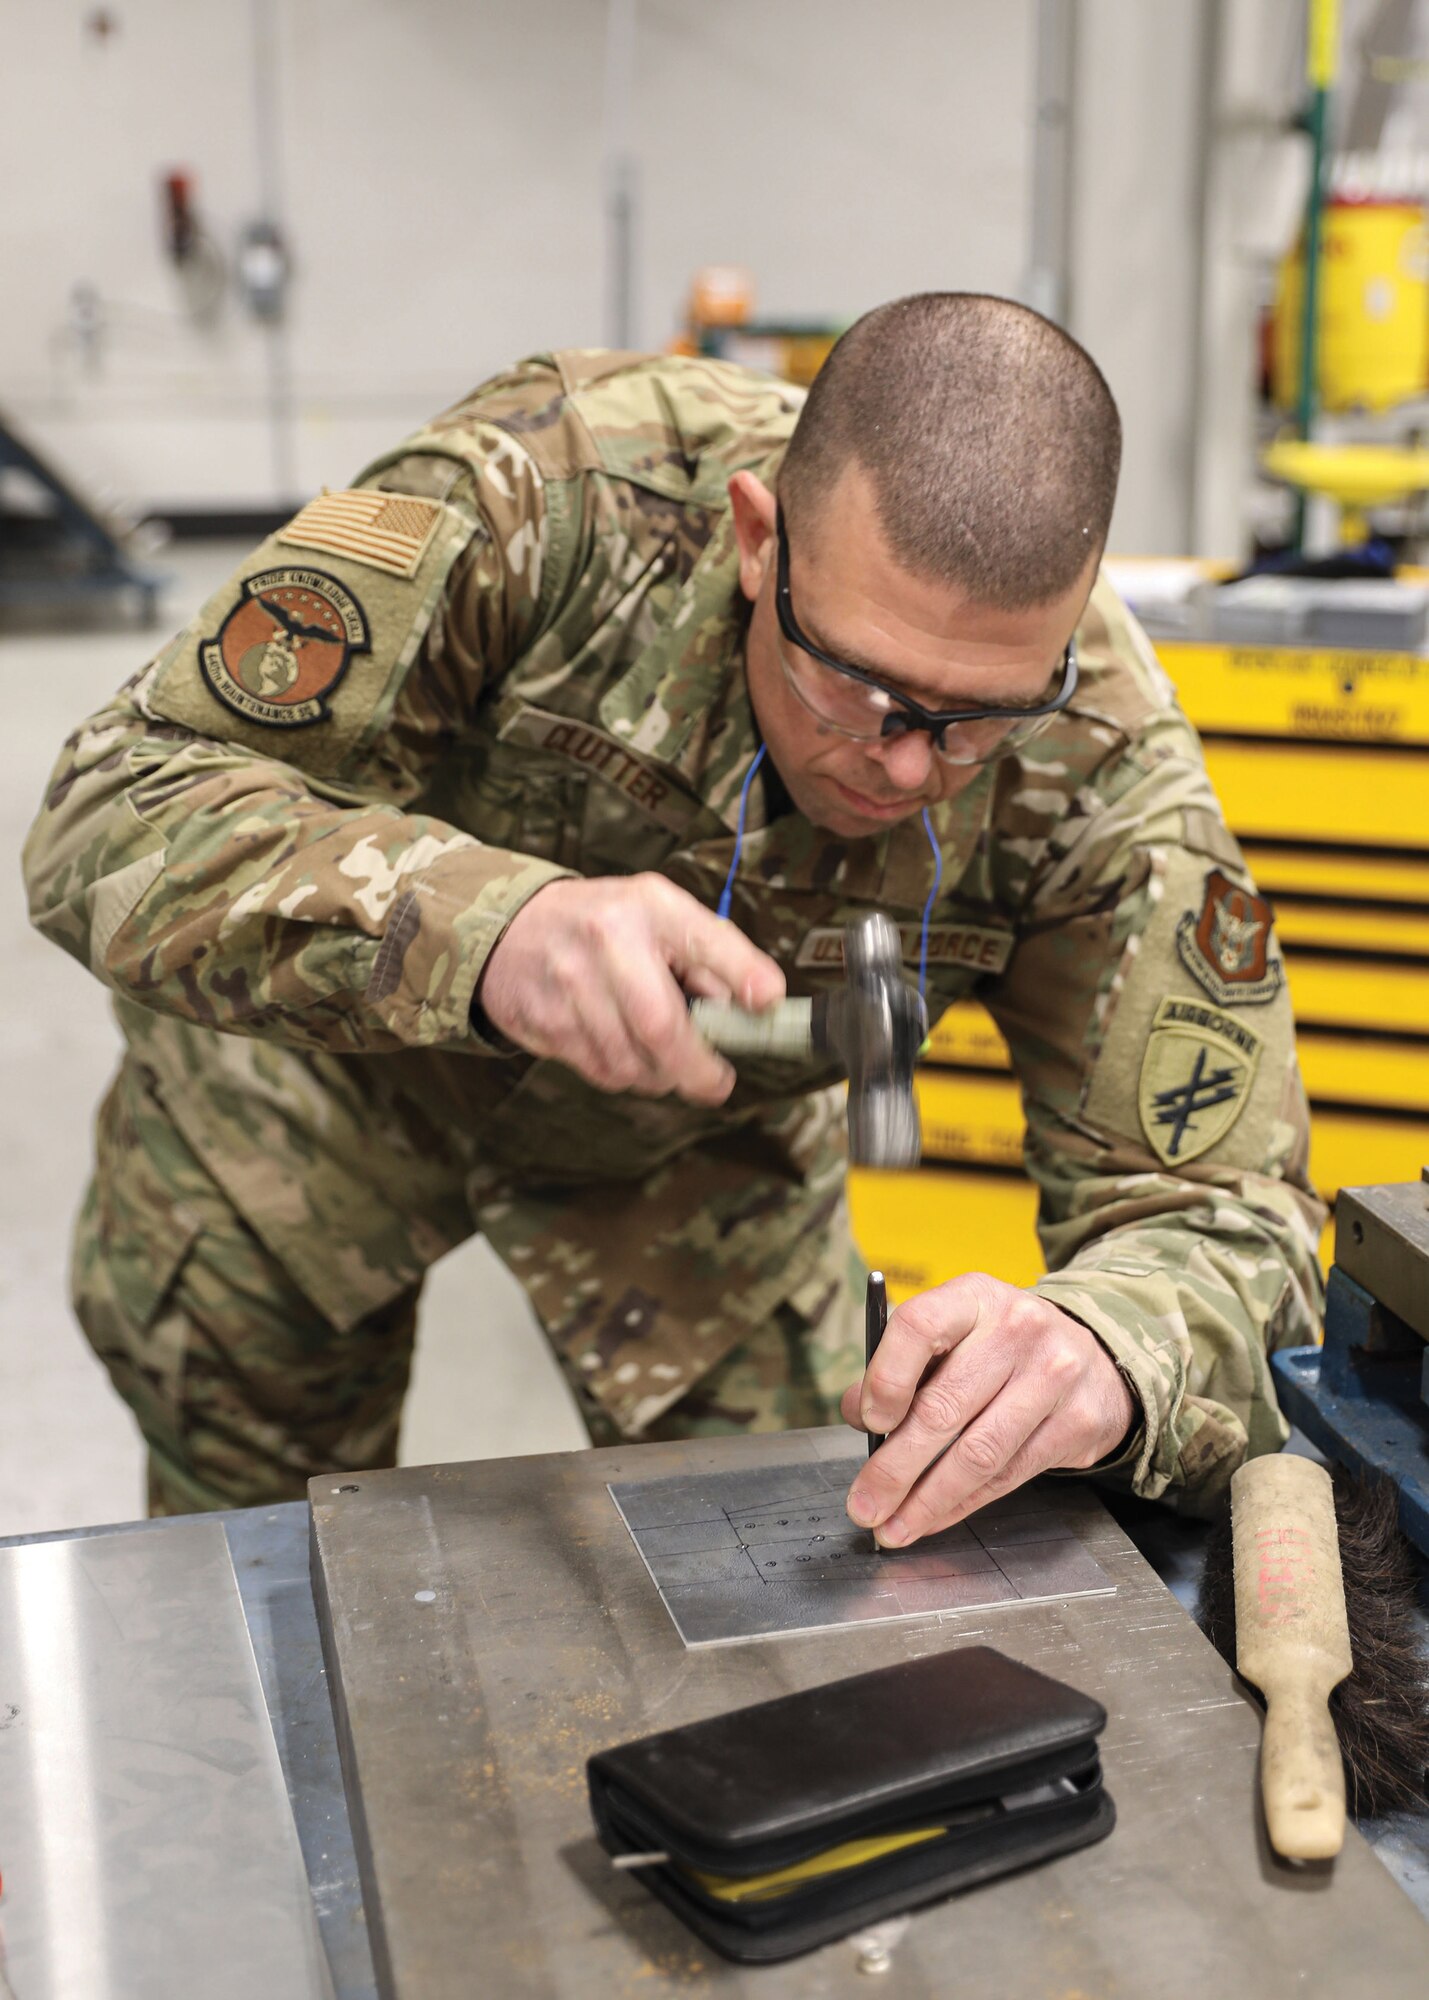 Tech. Sgt. Calvin J. Clutter, an aircraft structural maintenance technician with the 445th Maintenance Squadron’s Fabrication Shop, manufactures an oxygen box bracket for a C-17 Globemaster III aircraft, March 12, 2022. This bracket, though small in size, will eventually go on to be a part of the complex oxygen delivery system on a C-17. The fabrication shop uses a variety of machines to create, repair, or replace parts on the aircraft providing behind the scenes support that is vital to aircraft functionality.